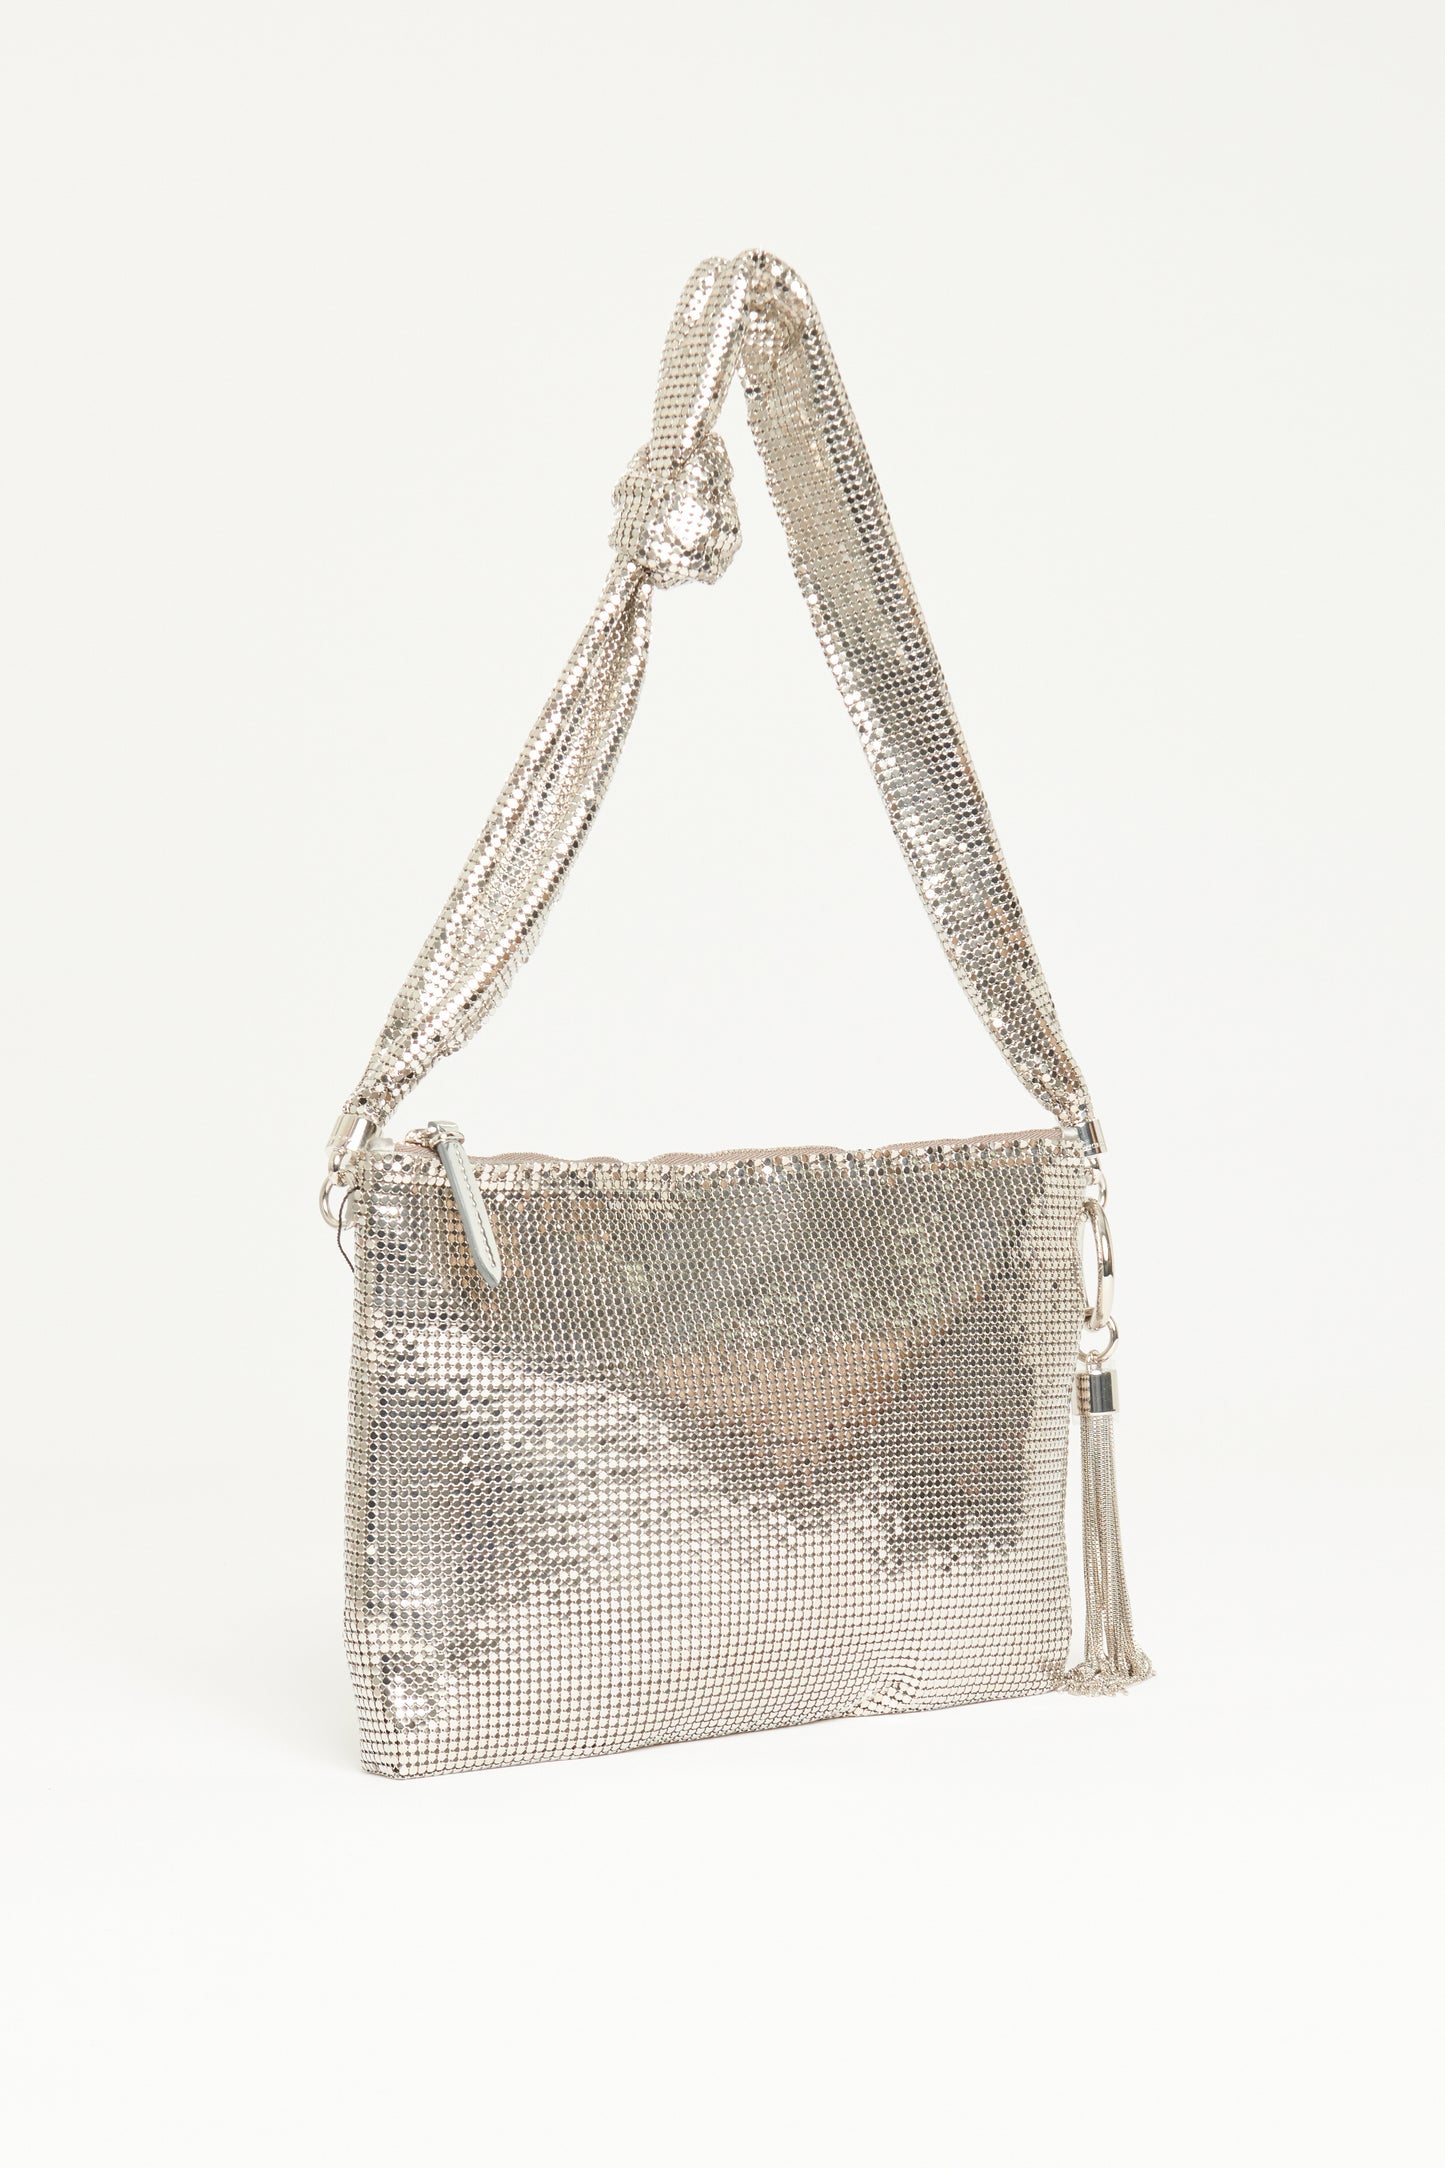 Silver Mesh Chainmail Preowned Callie Shoulder Bag